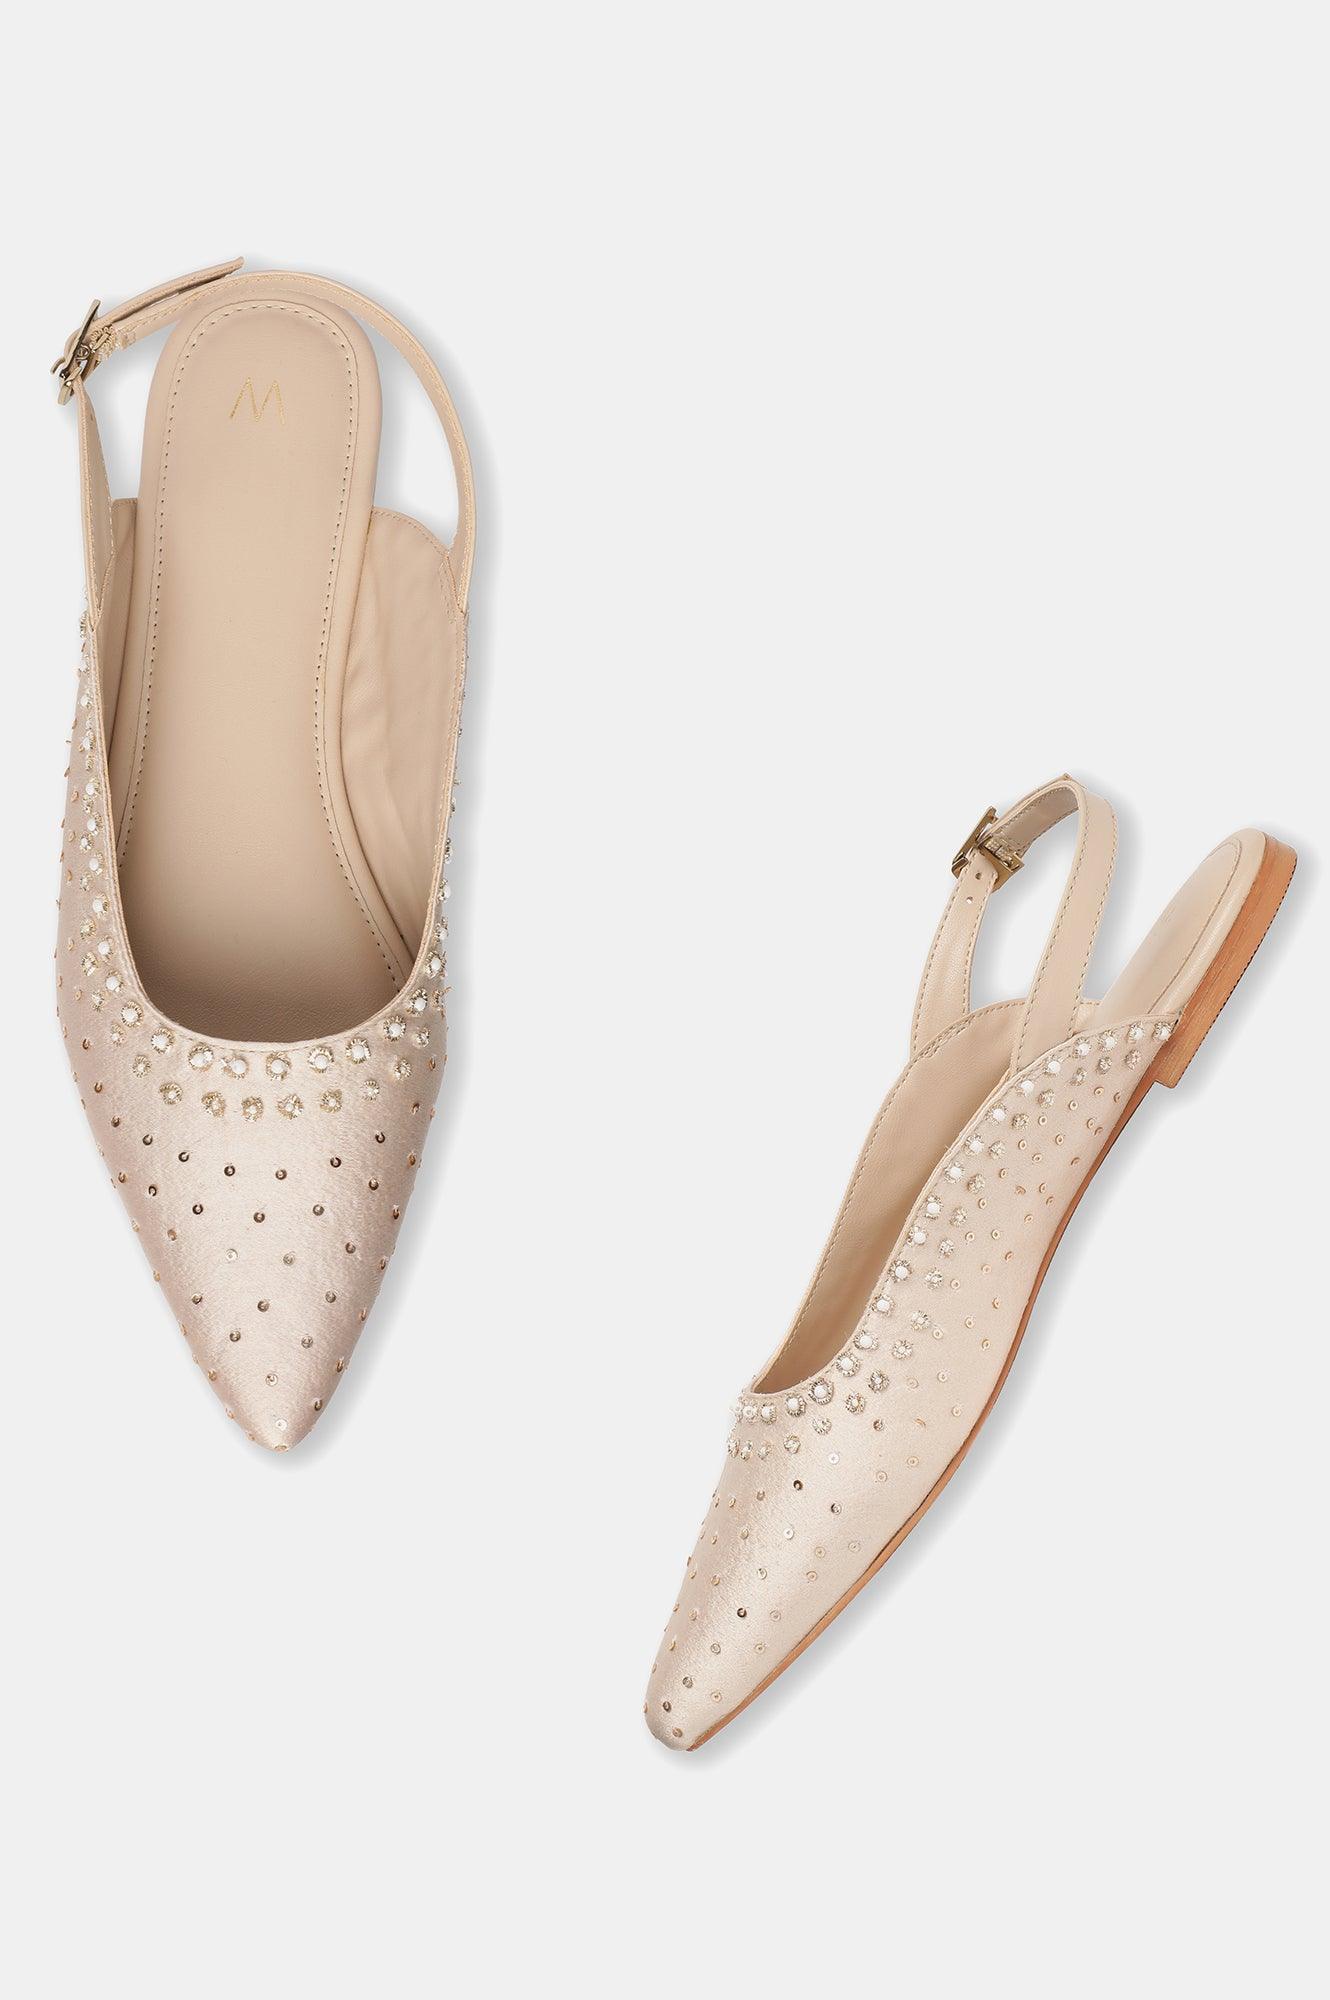 W Beige Embroidered Pointed Toe Flat-Wcharlotte - wforwoman